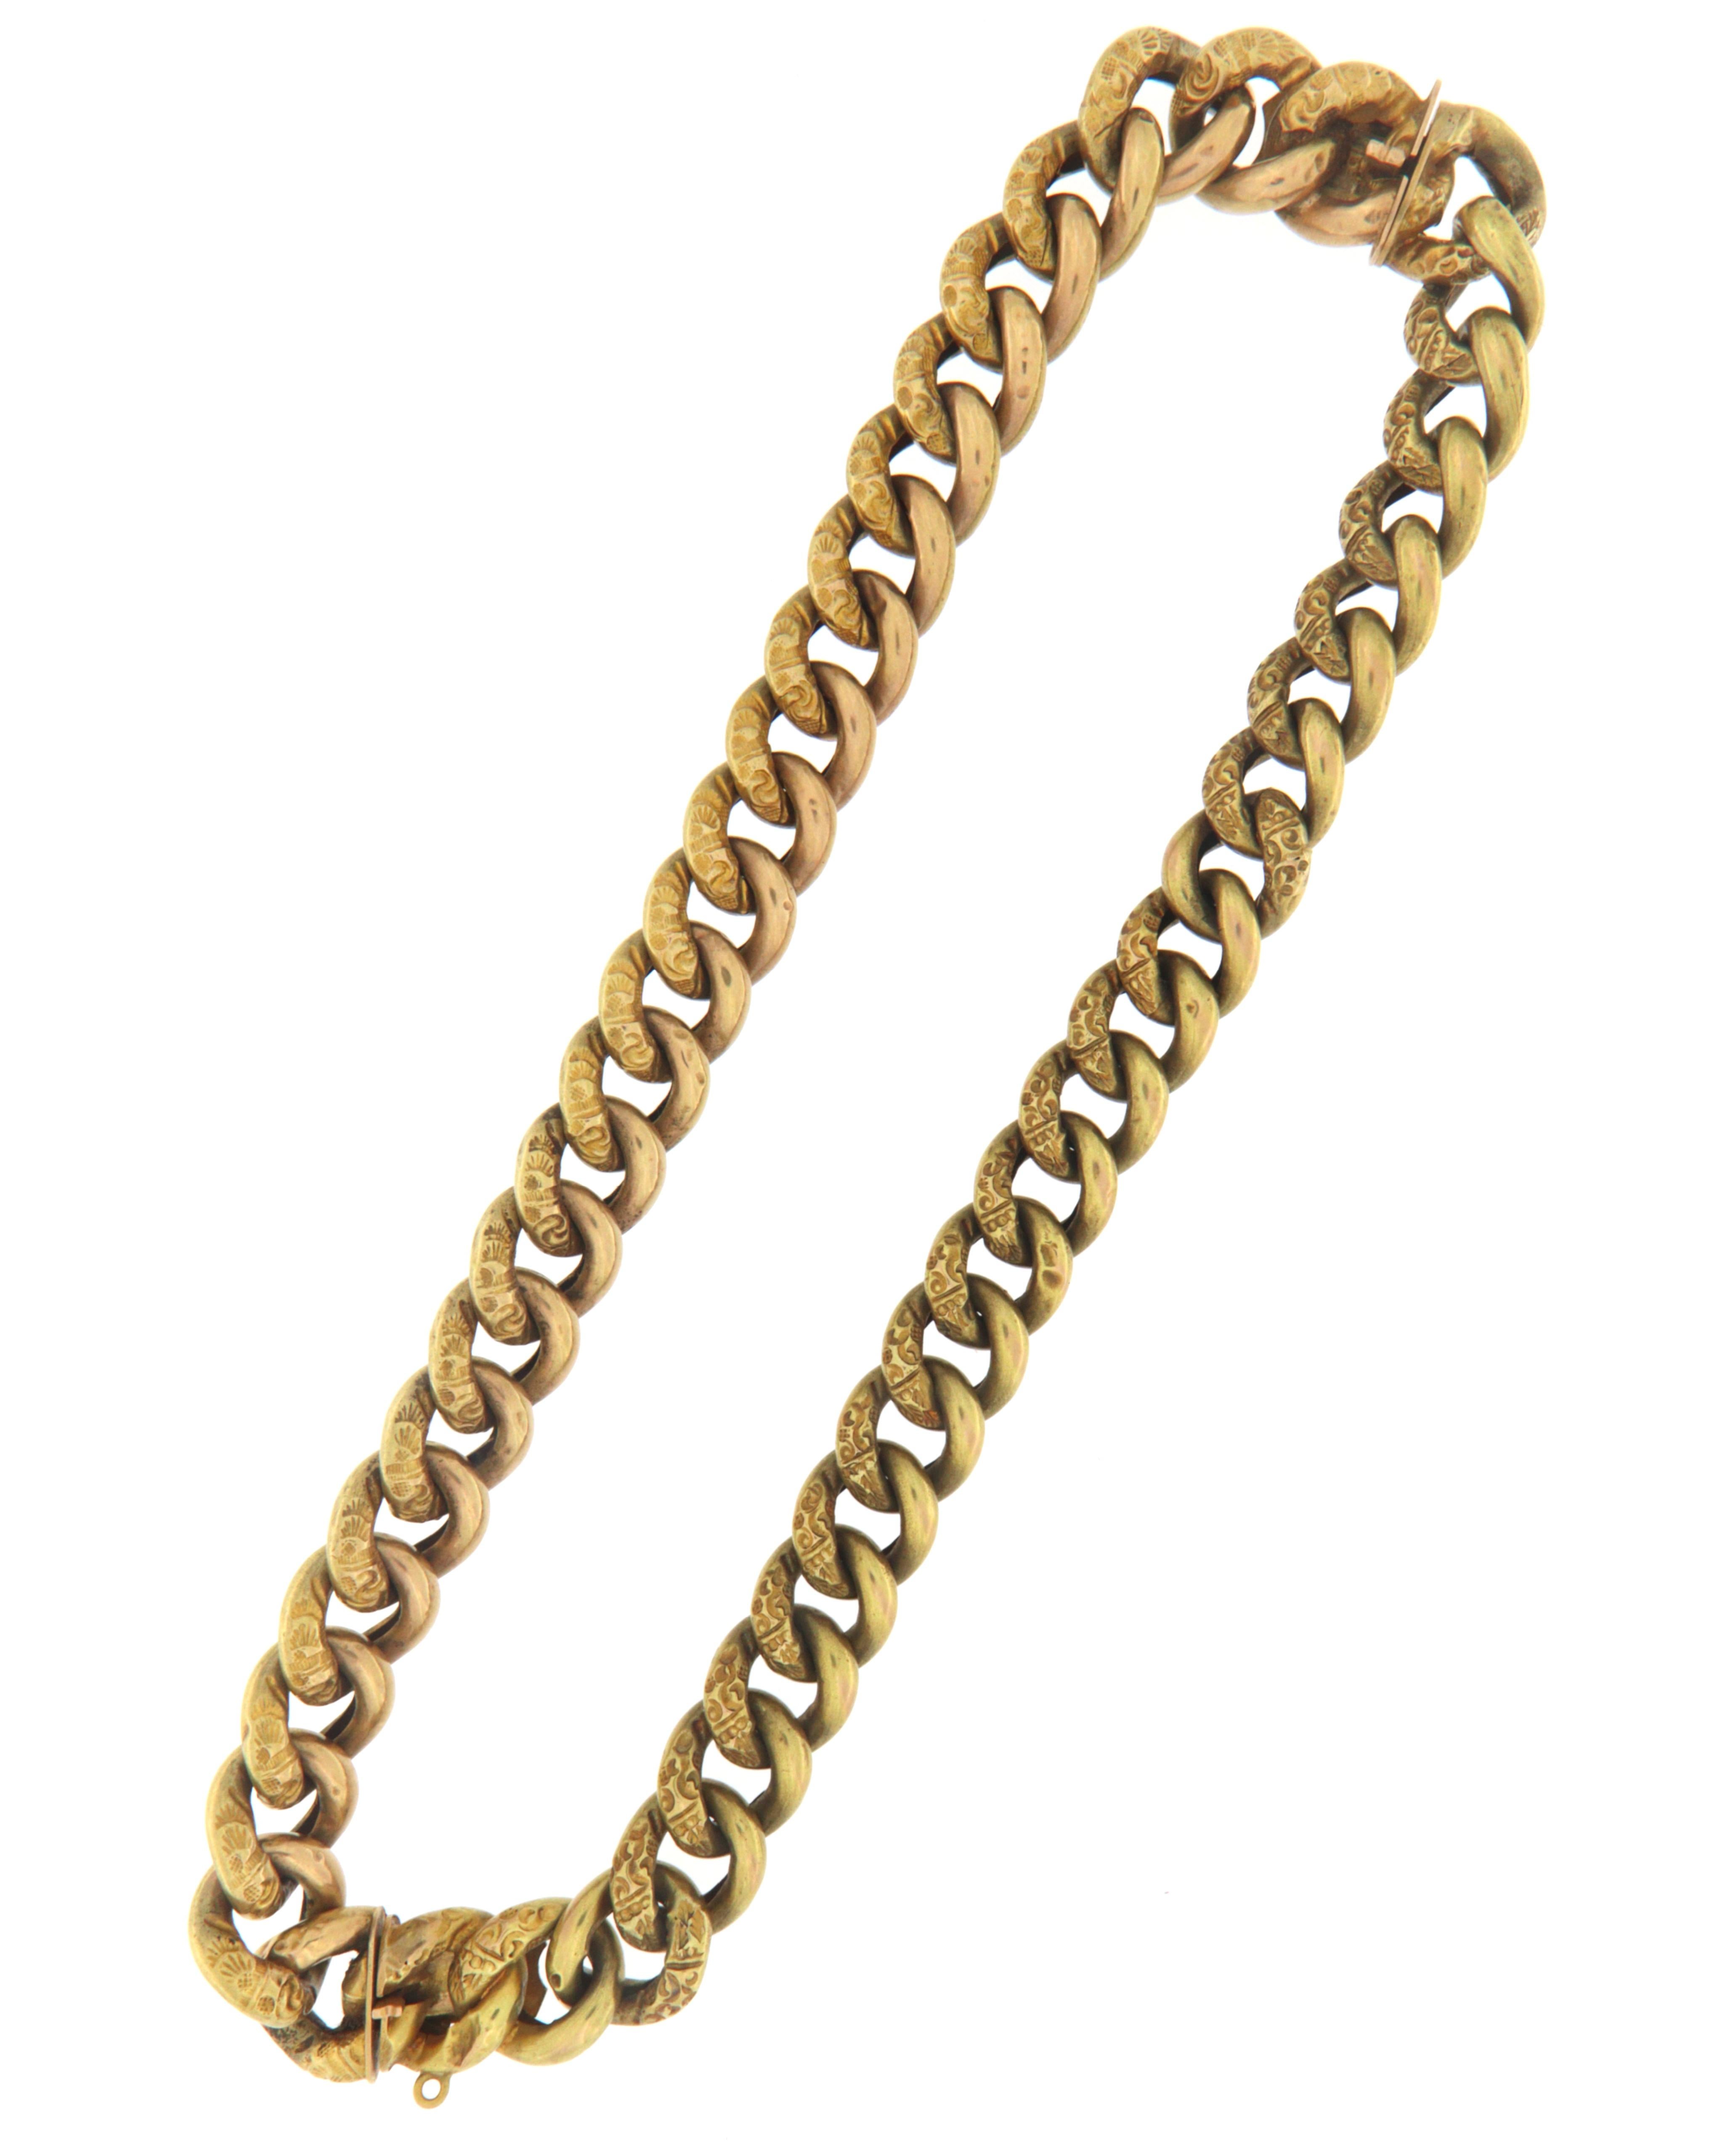 Grumetta necklace of the eighteenth century made in the seventies completely worked by hand by expert Italian artisans in 14 Carat yellow gold with double clasp that gives the possibility to transform the necklace into two bracelets.

Given the age